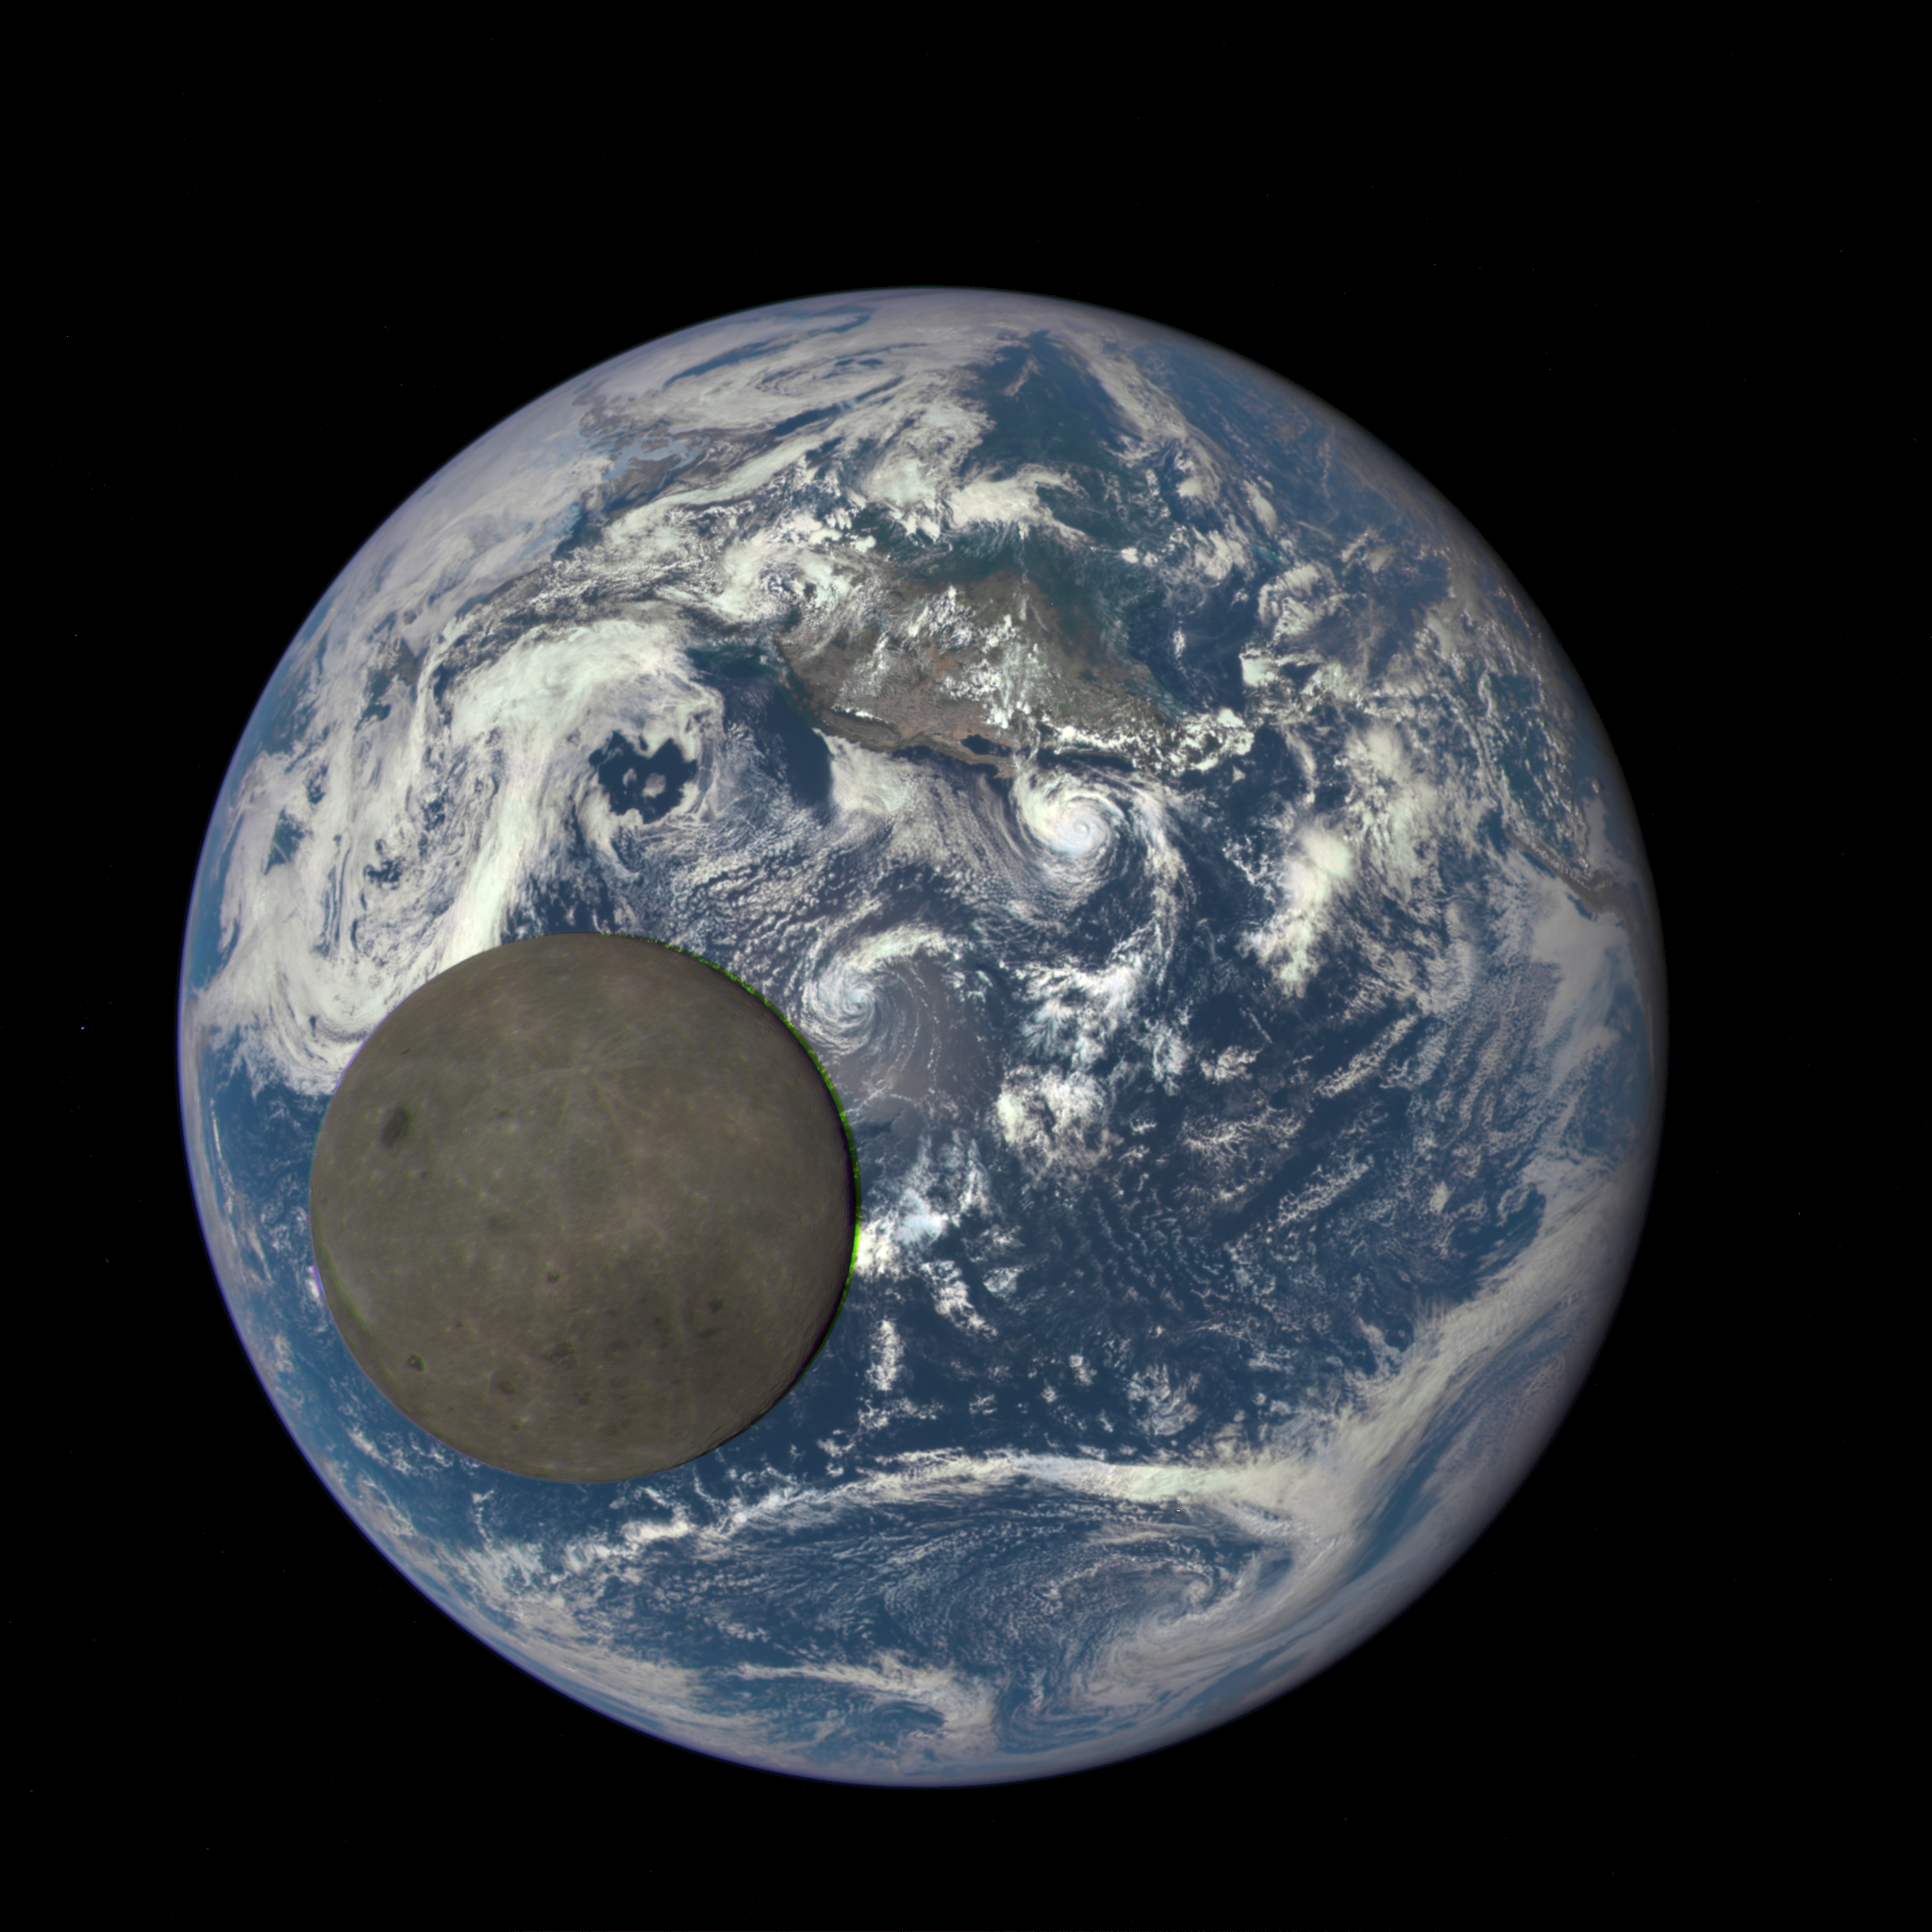 from-a-million-miles-away-nasa-camera-shows-moon-crossing-face-of-earth_20129140980_o~orig.png